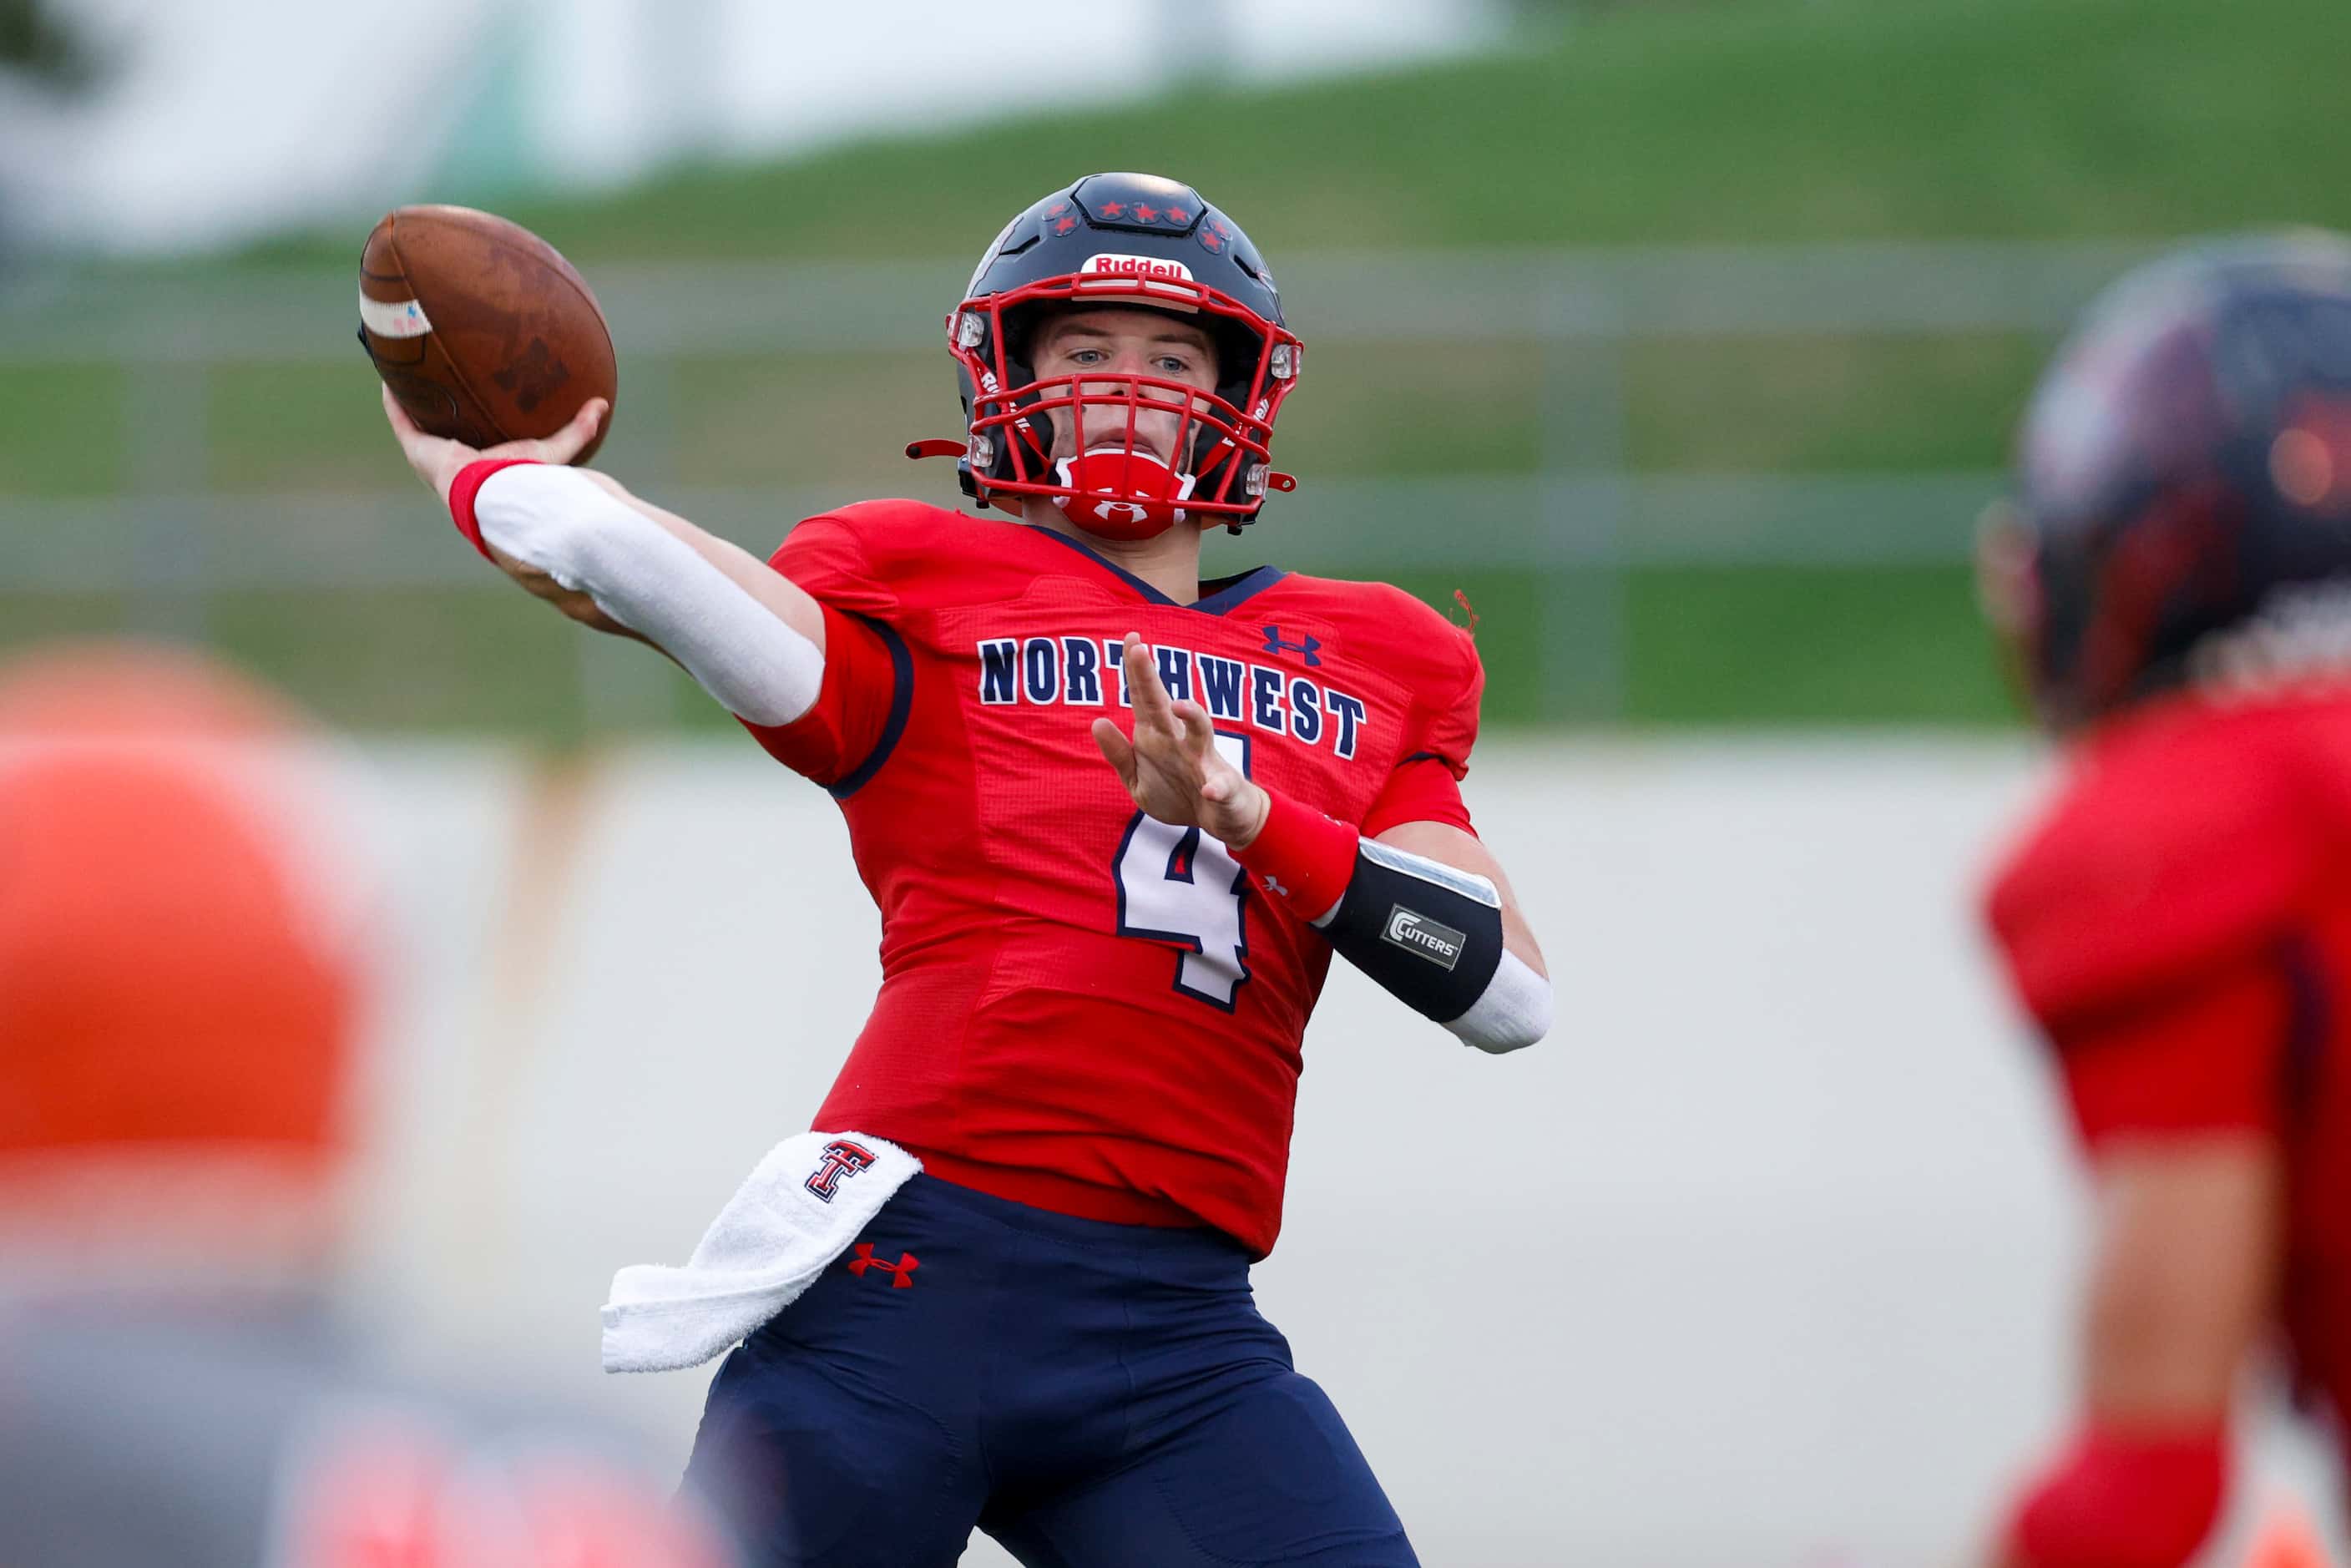 Justin Northwest quarterback Jake Strong (4) throws the ball during the second quarter of a...